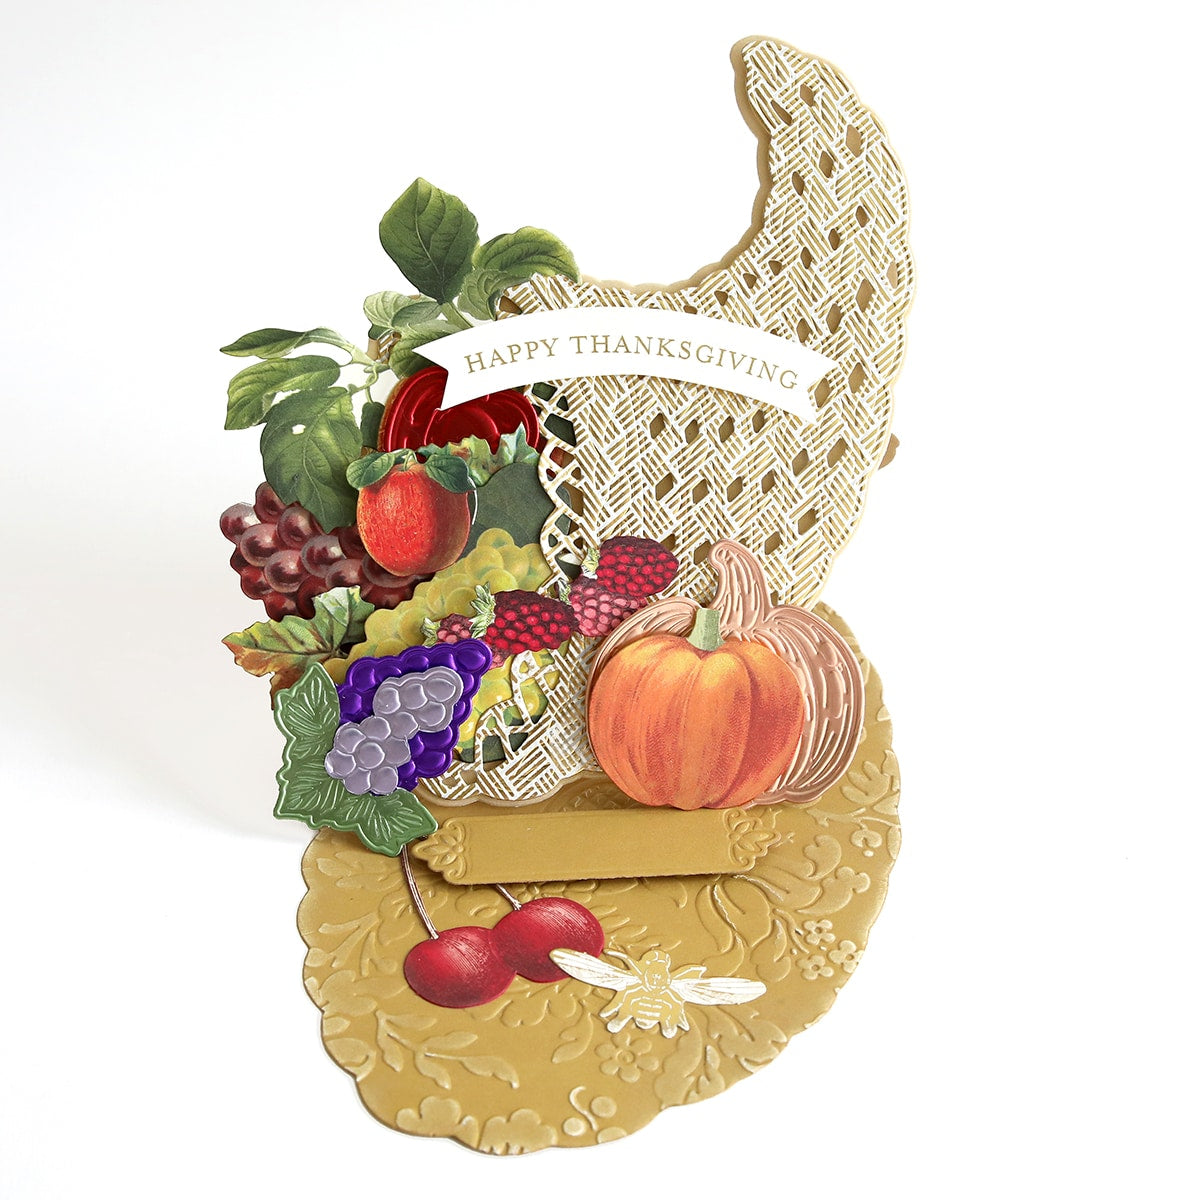 A Cornucopia Easel Card Dies with fruits and vegetables on it.